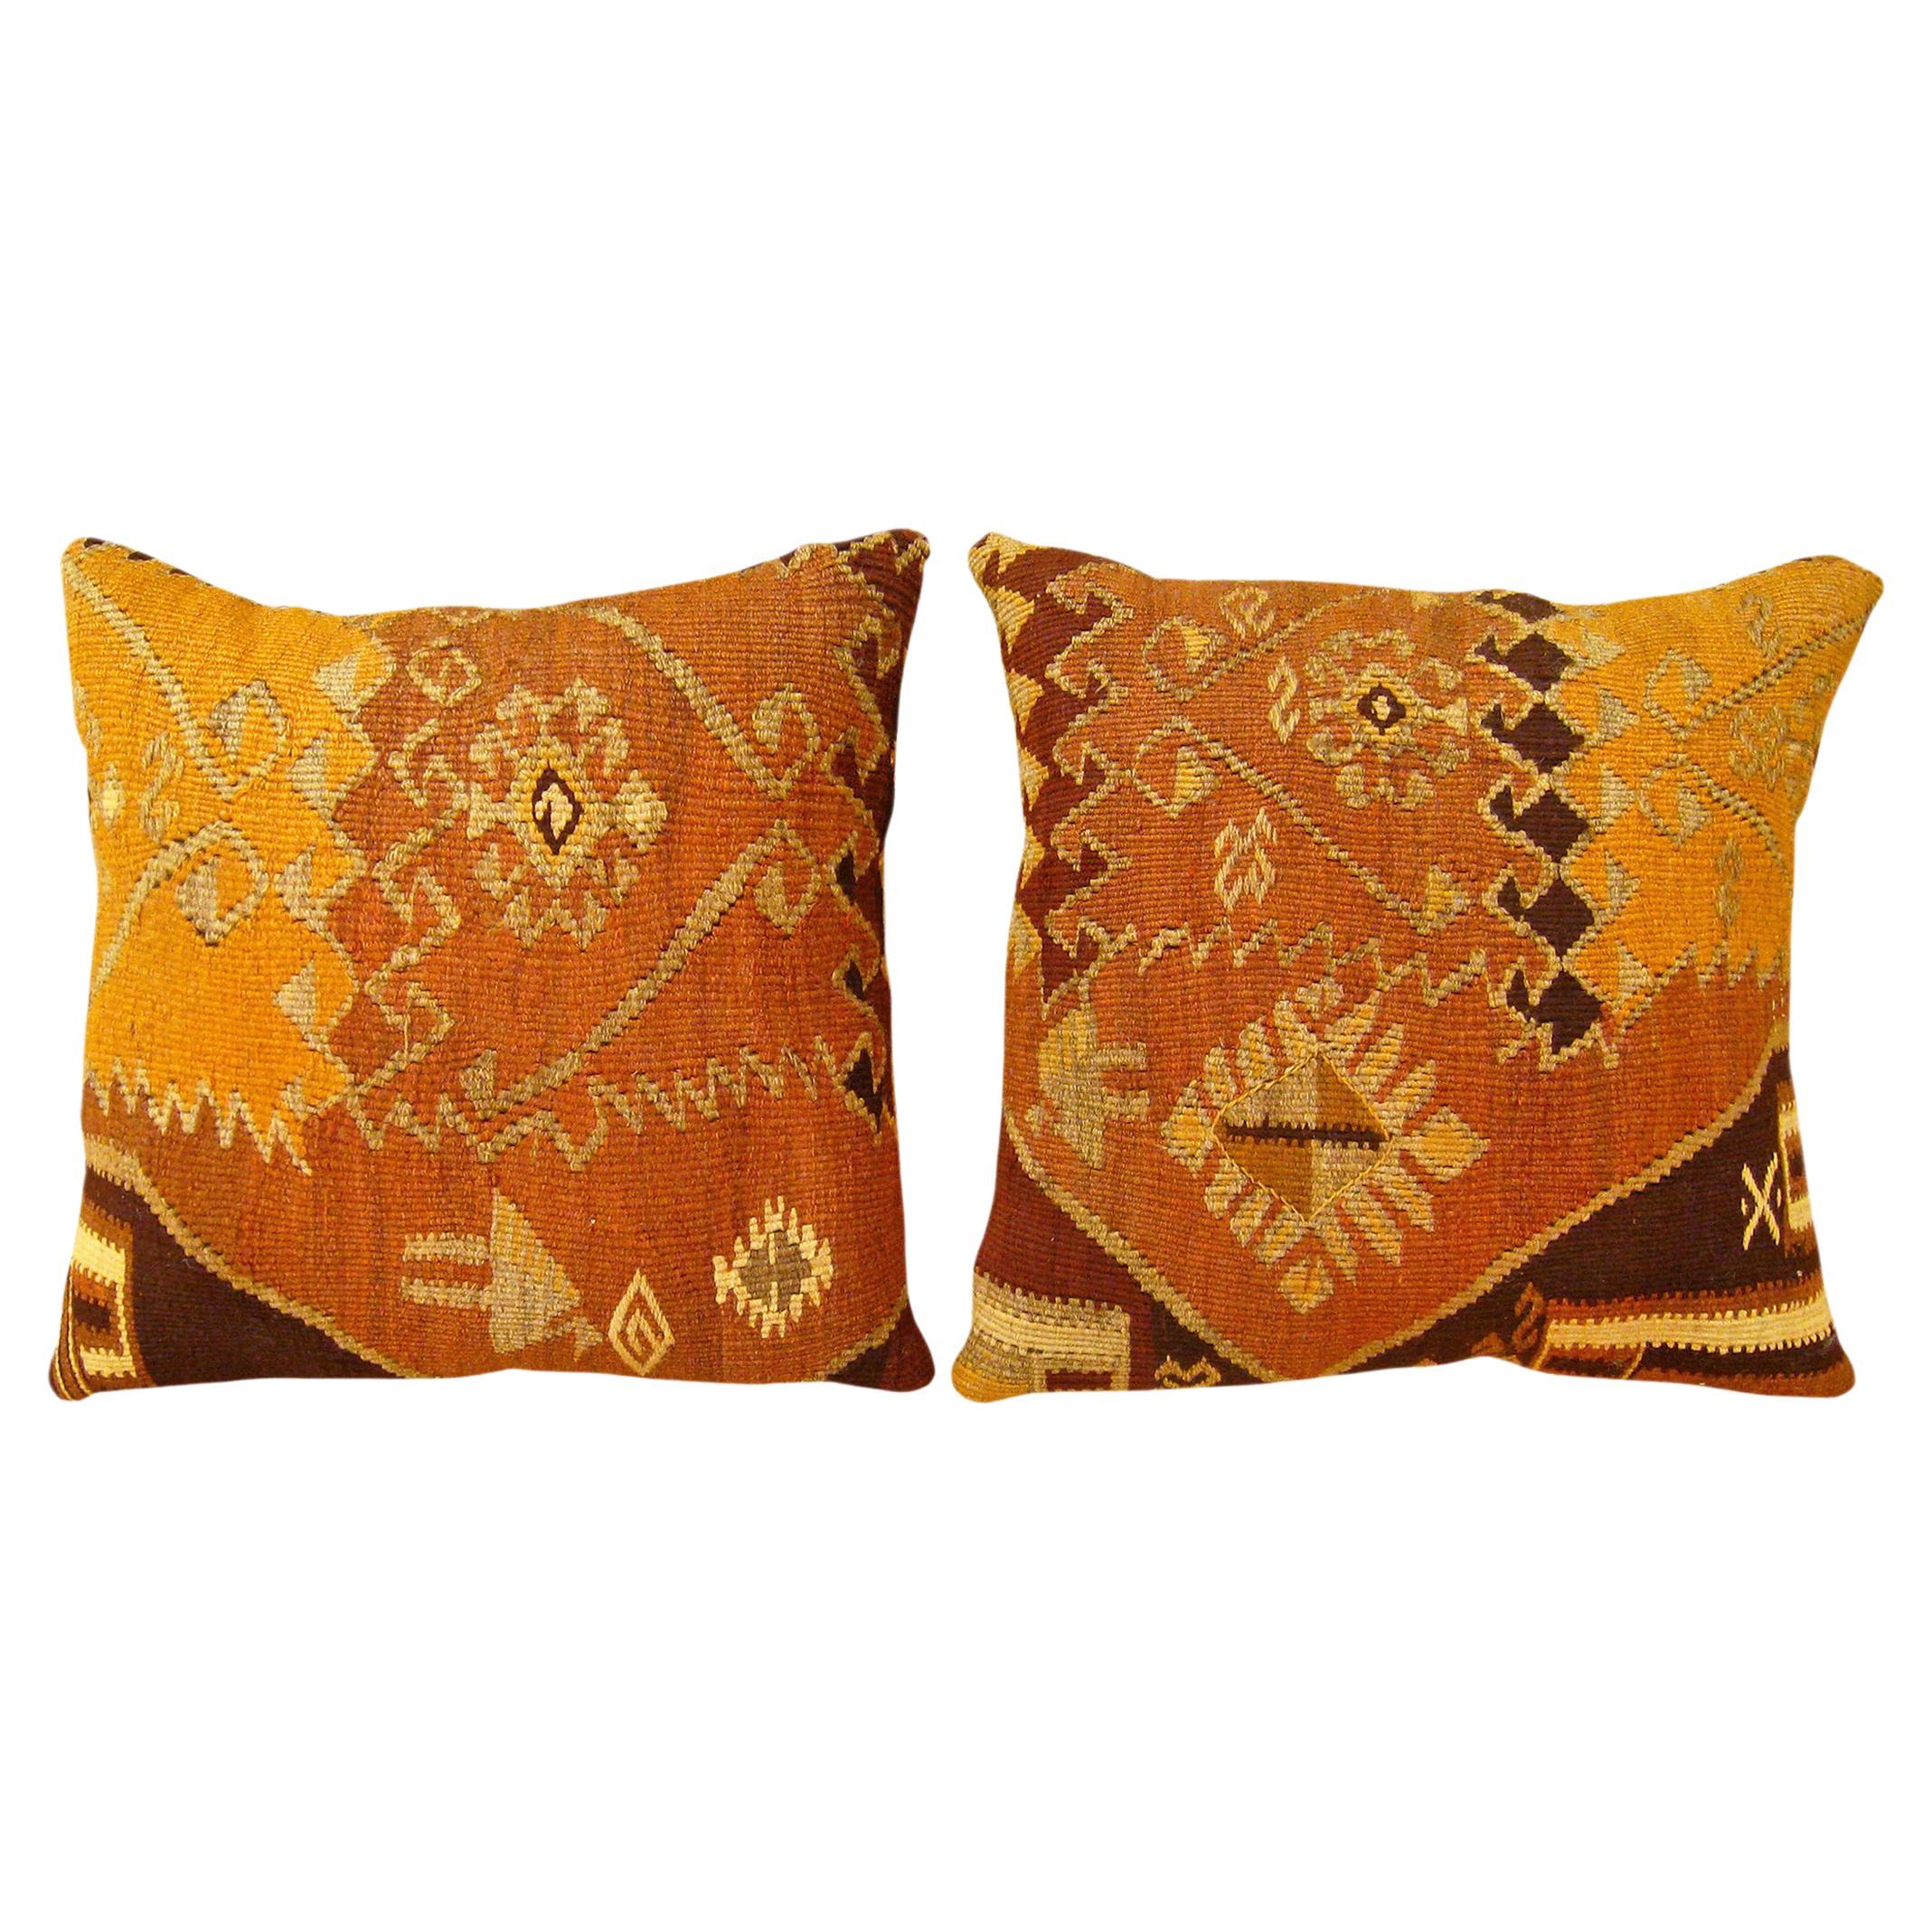 Pair of Decorative Vintage Turkish Kilim Rug Pillows with Geometric Abstracts